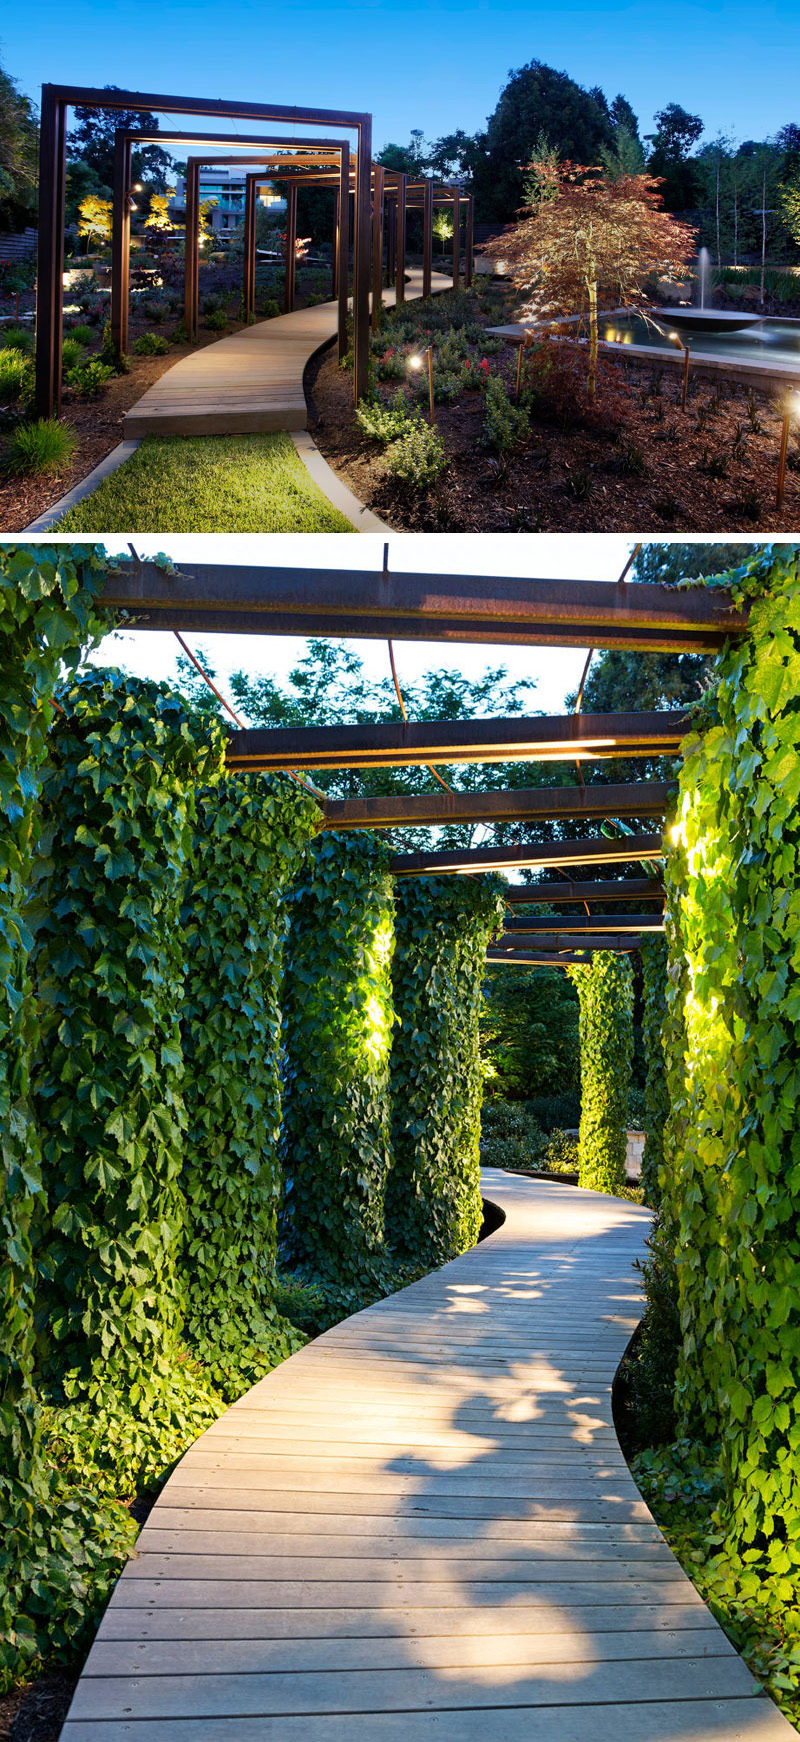 This modern wood pathway is surrounded by ivy covered arches and lit up by overhead lights.